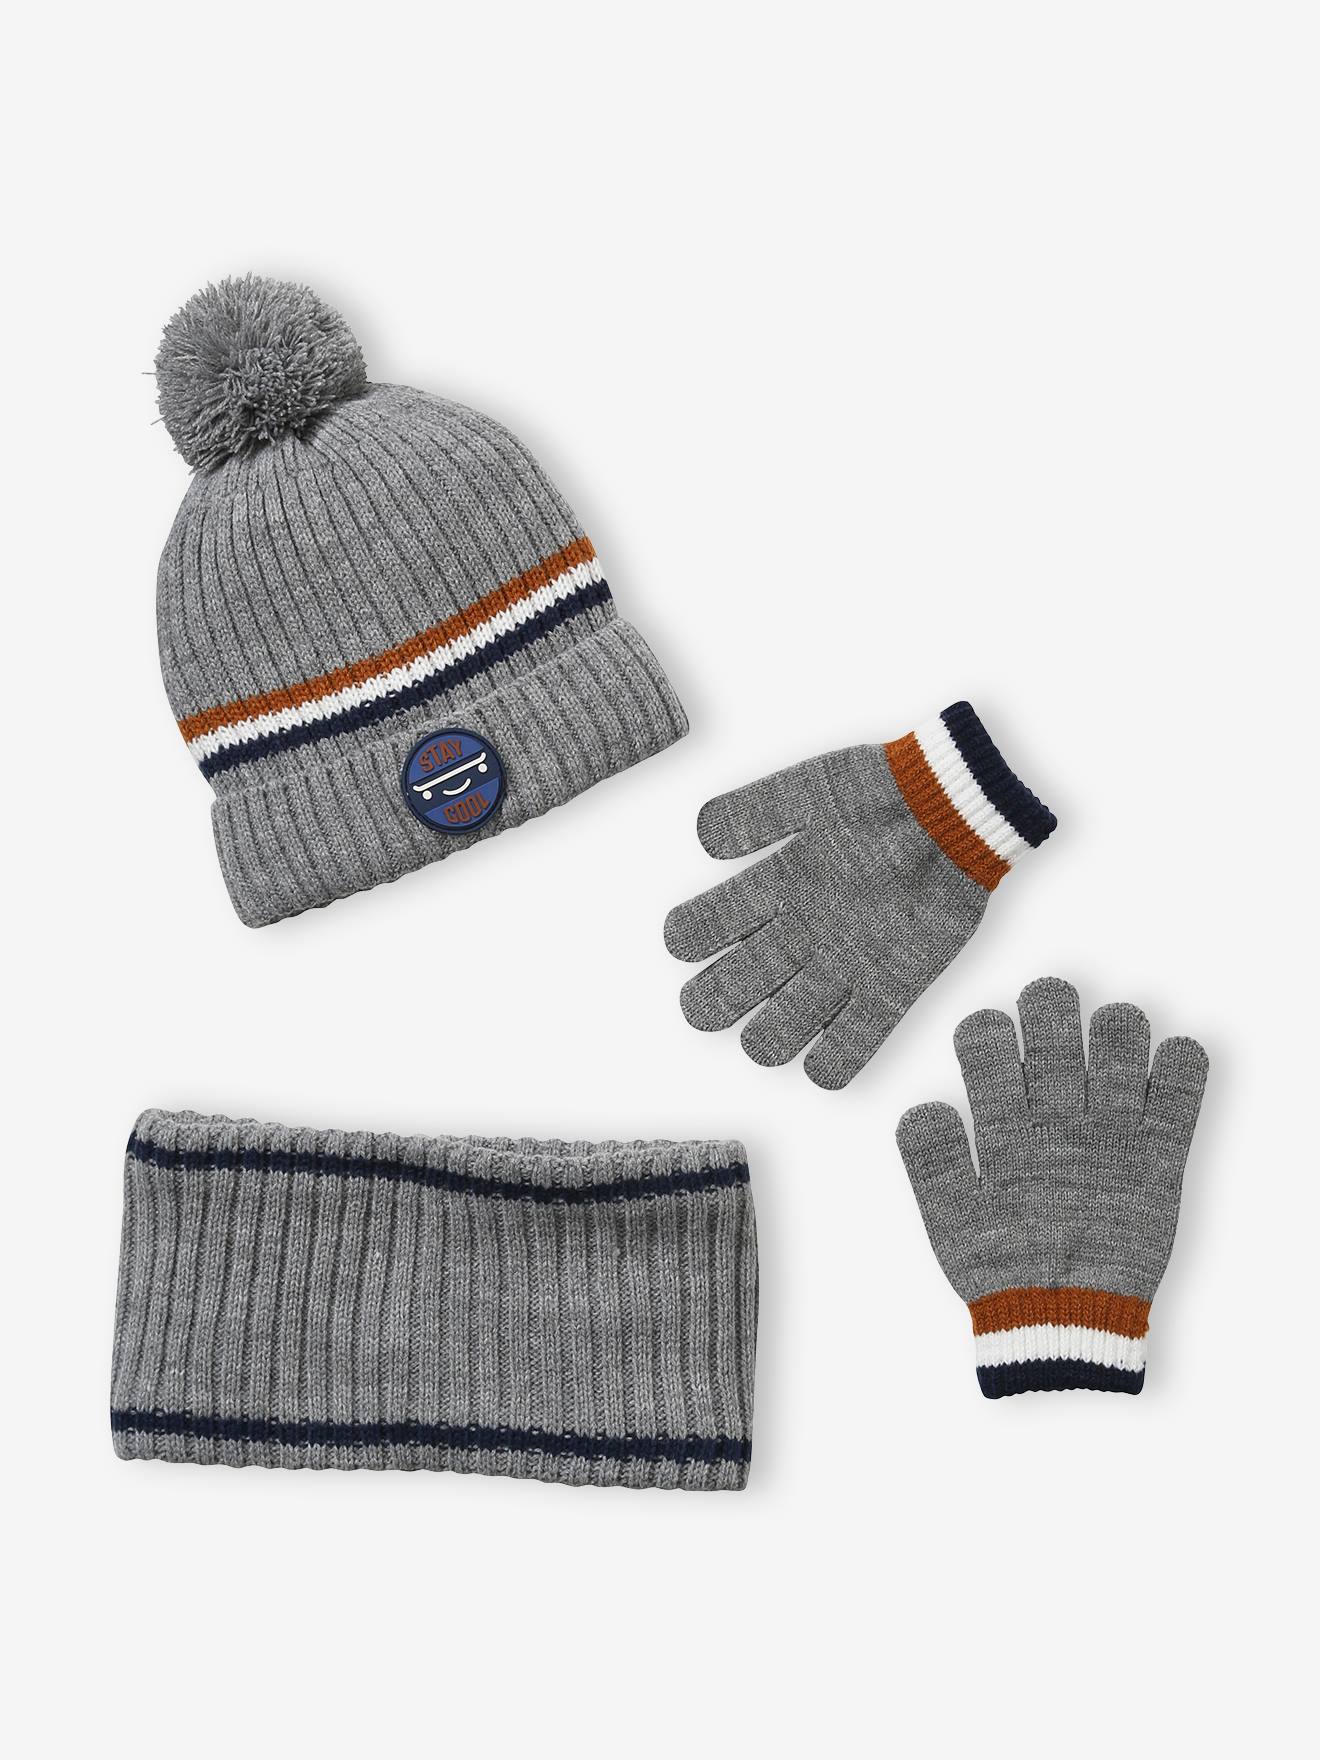 Beanie + Snood + Gloves Set in Rib Knit for Boys grey medium two color/multicol